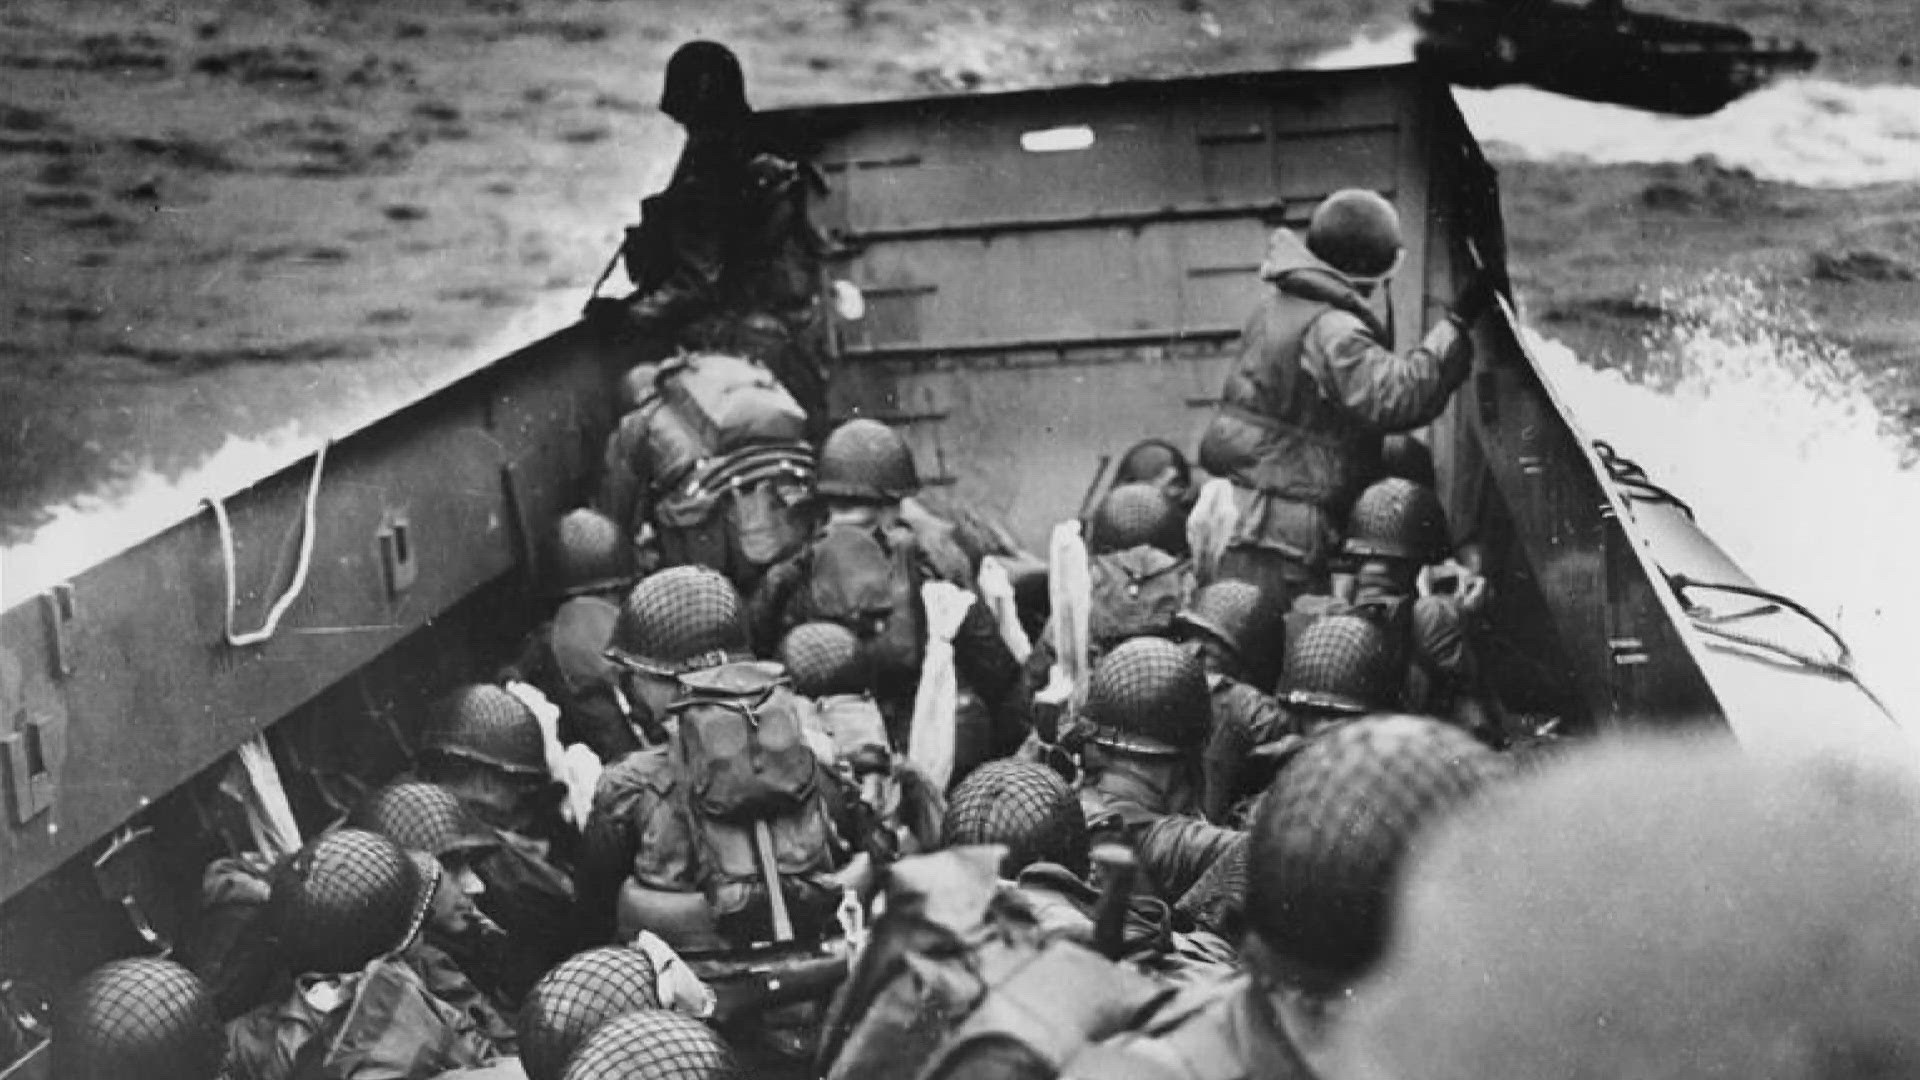 Allied forces led by the United States of America, pummeled German strongholds held on French beaches in the northern region of Normandy on June 6, 1944.